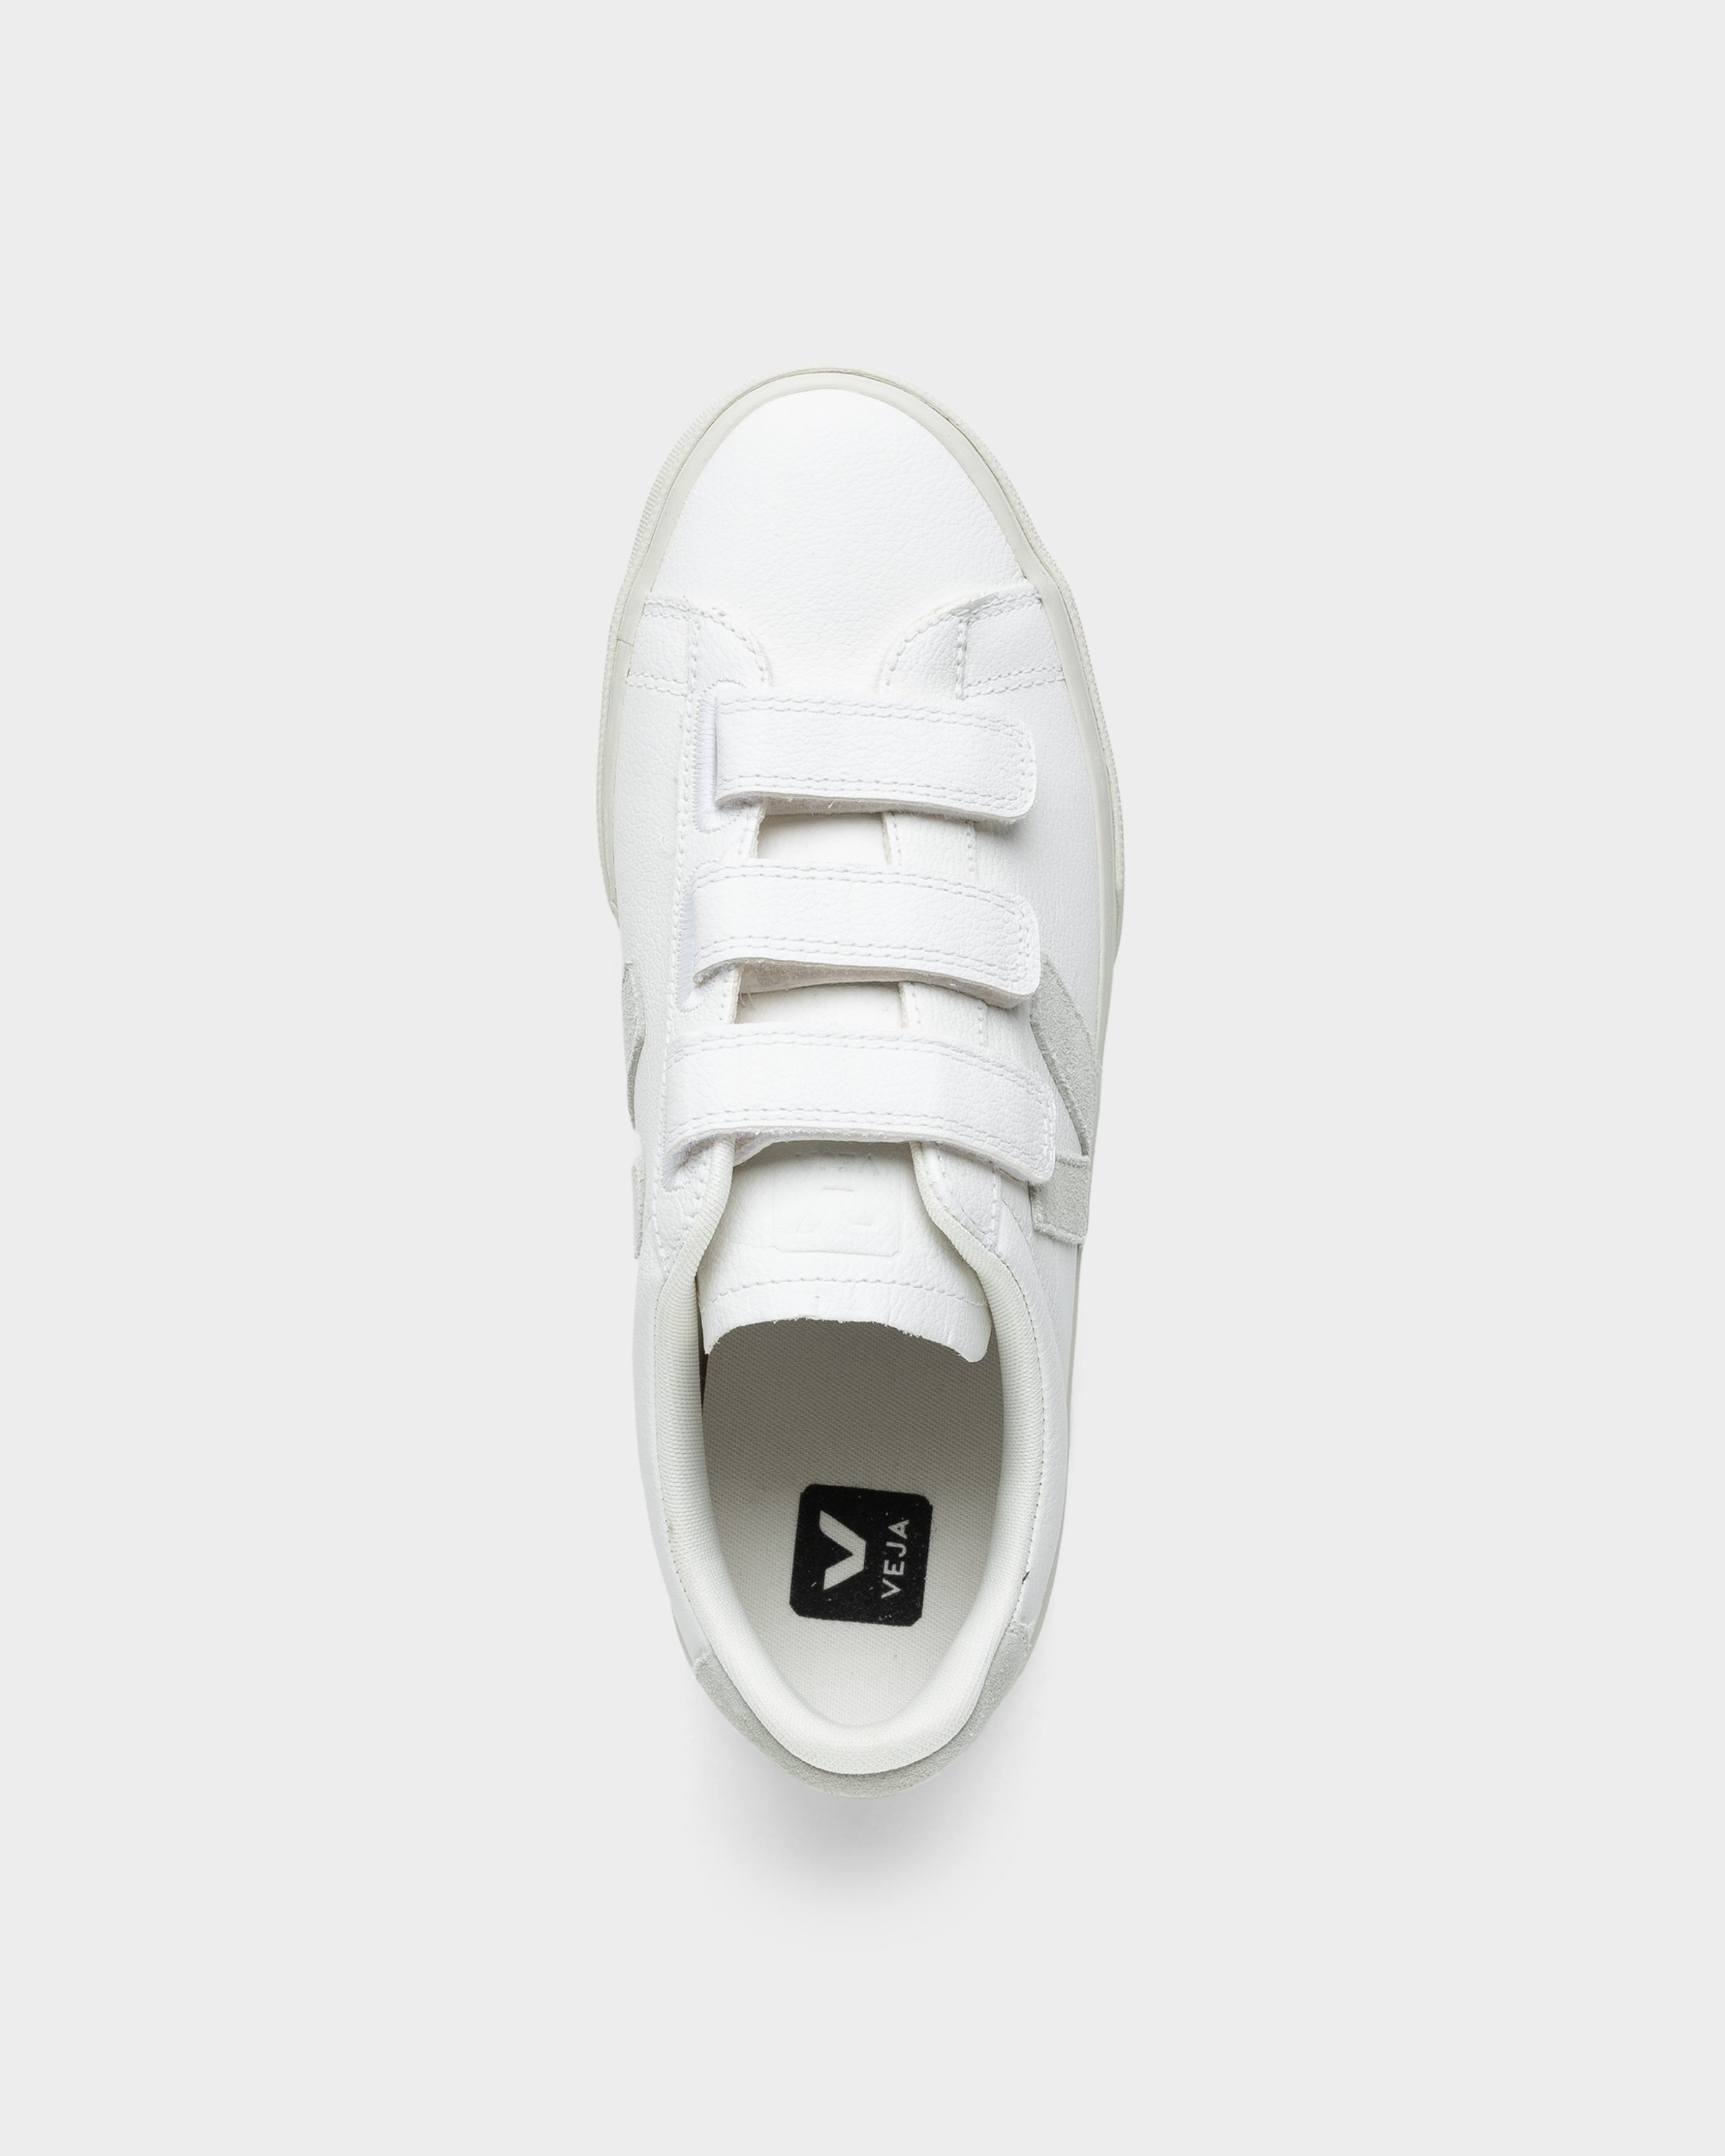 VEJA - Recife Chrome-Free Leather White/Natural - Footwear - White - Image 5